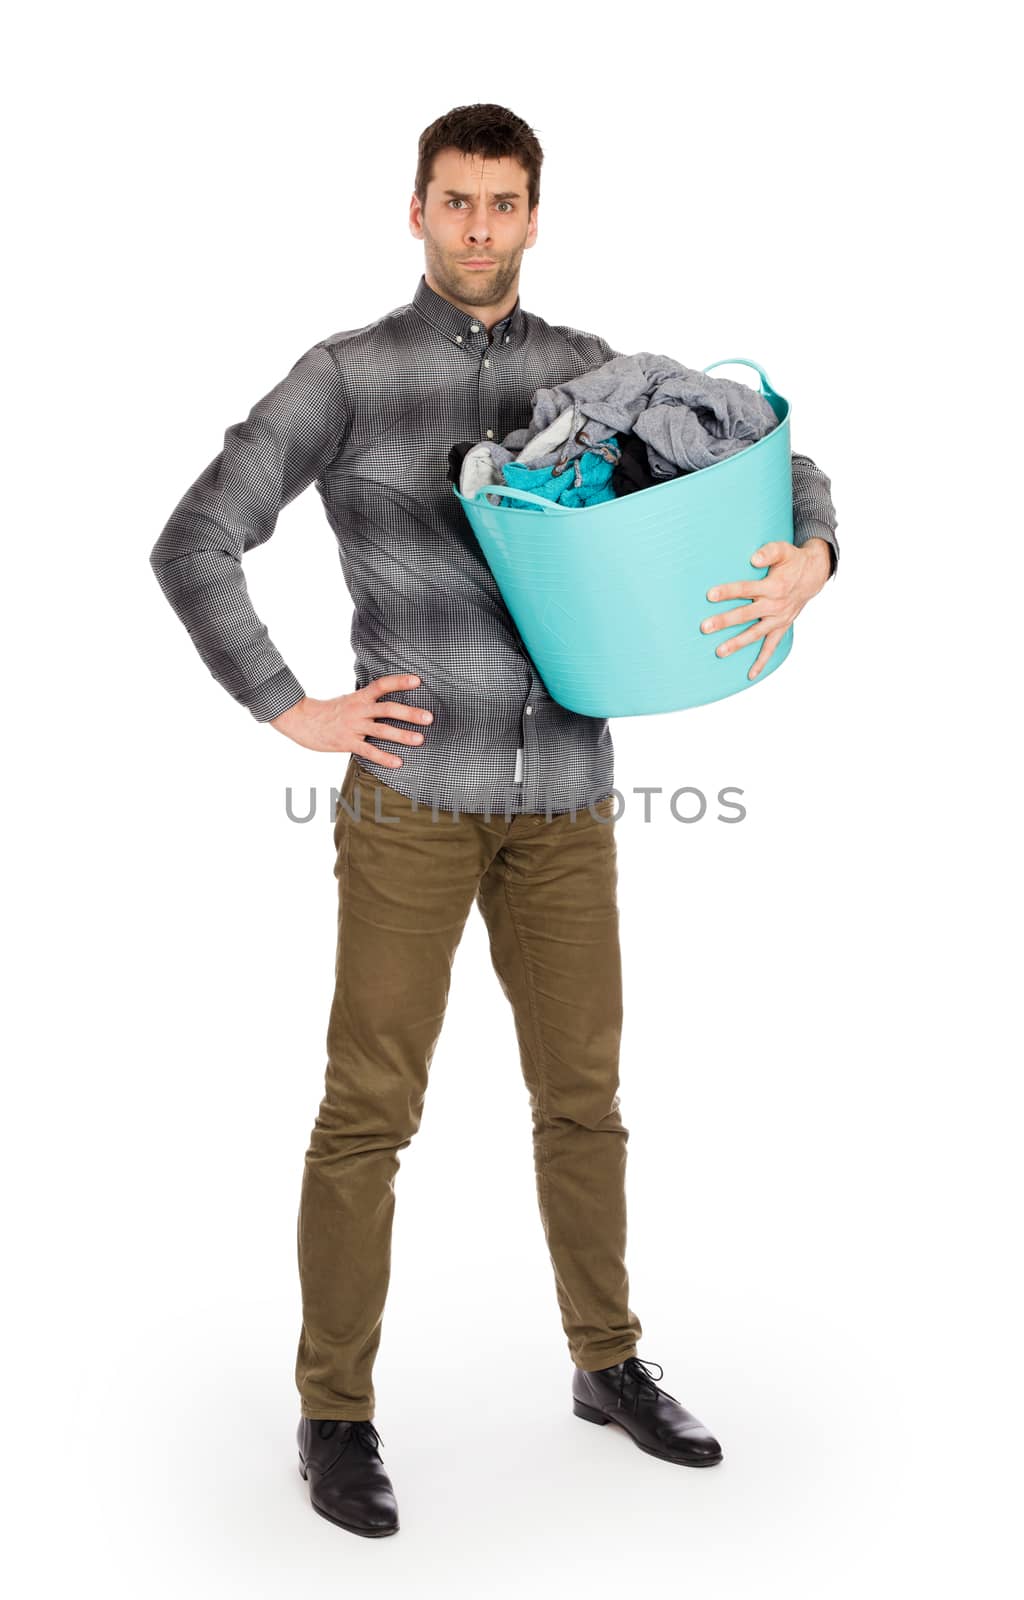 Full length portrait of a young man holding a laundry basket isolated on white background